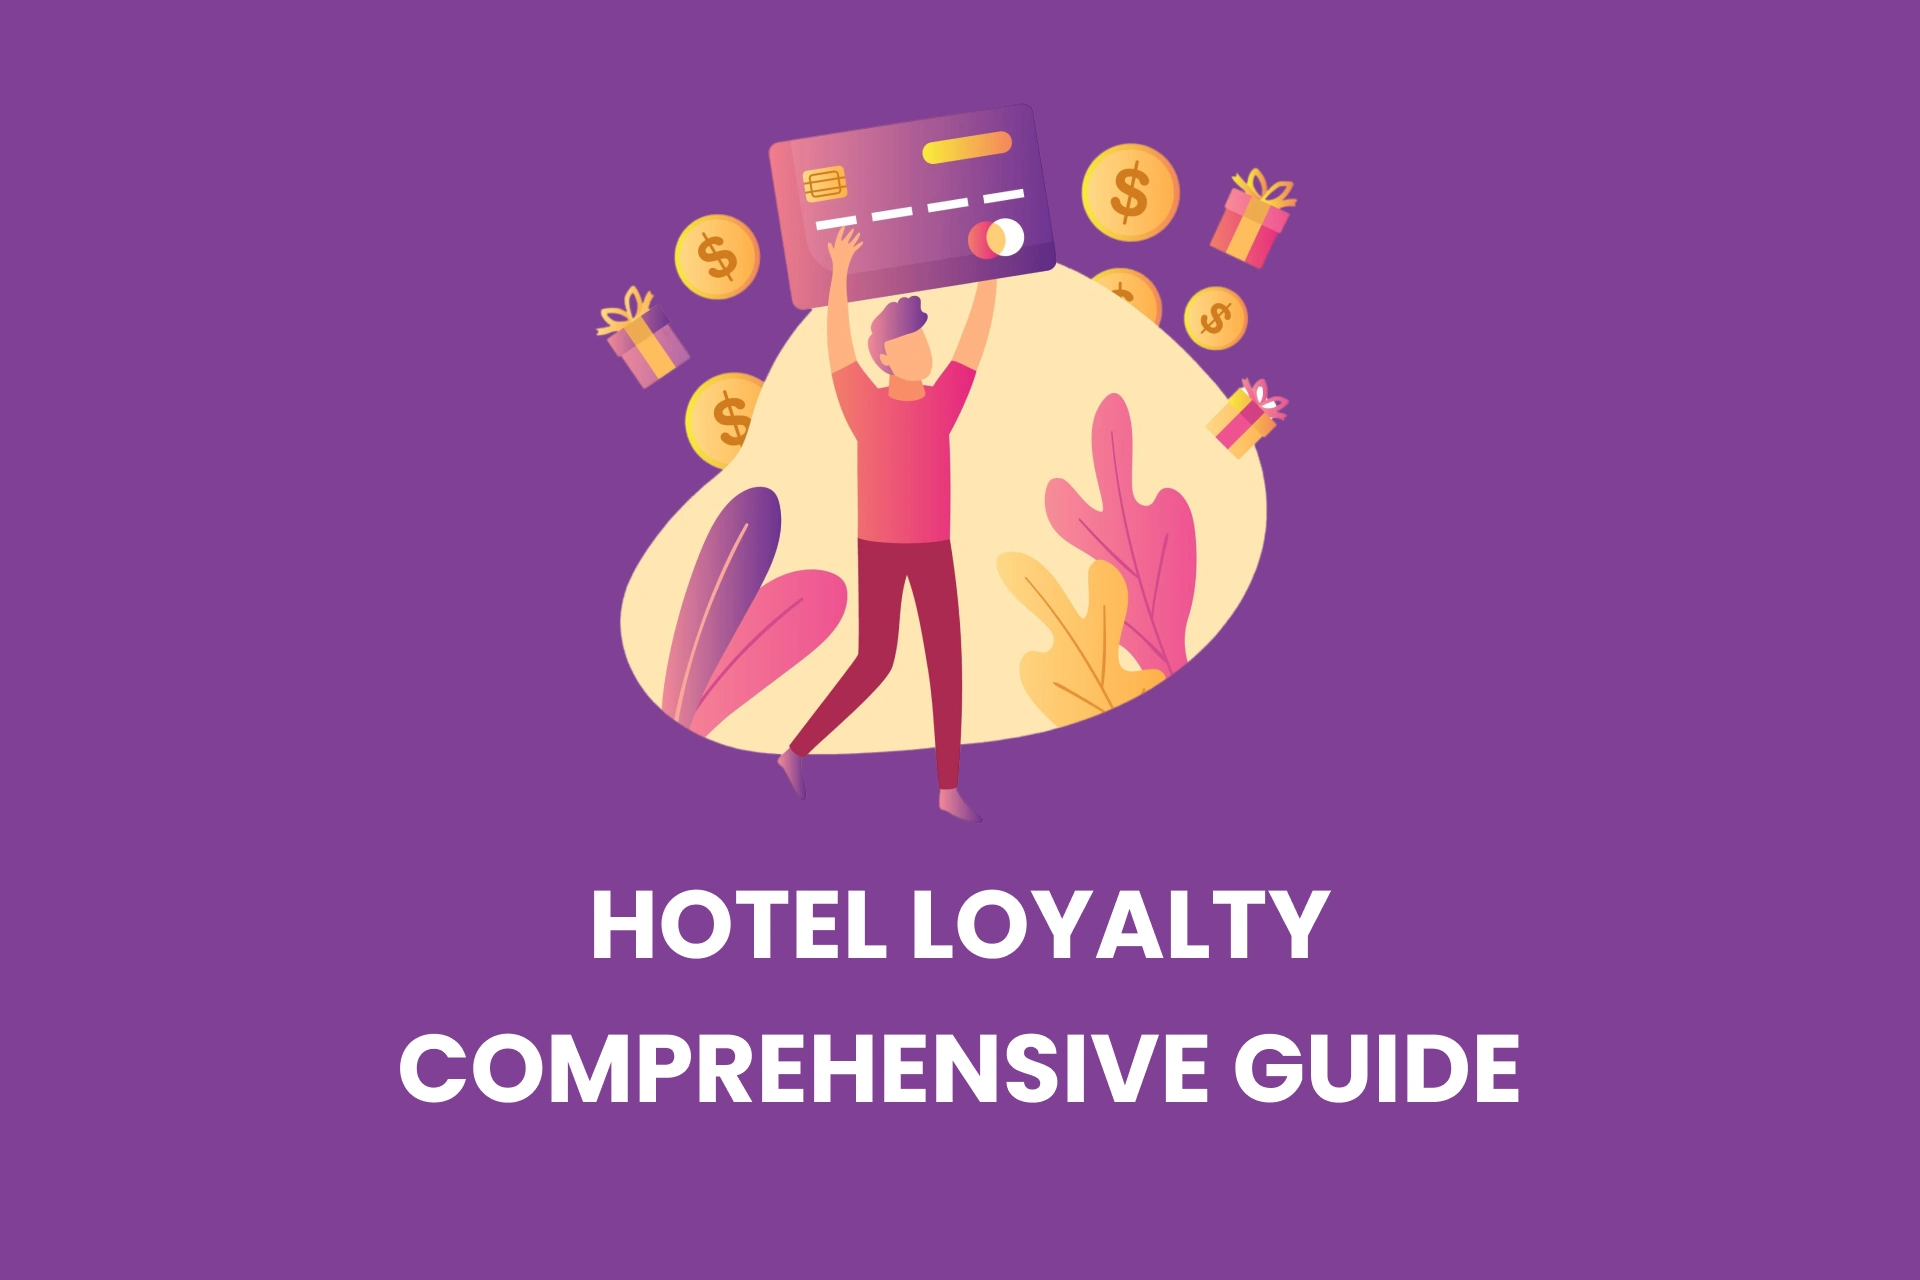 Hotel Loyalty Programs: A Comprehensive Guide